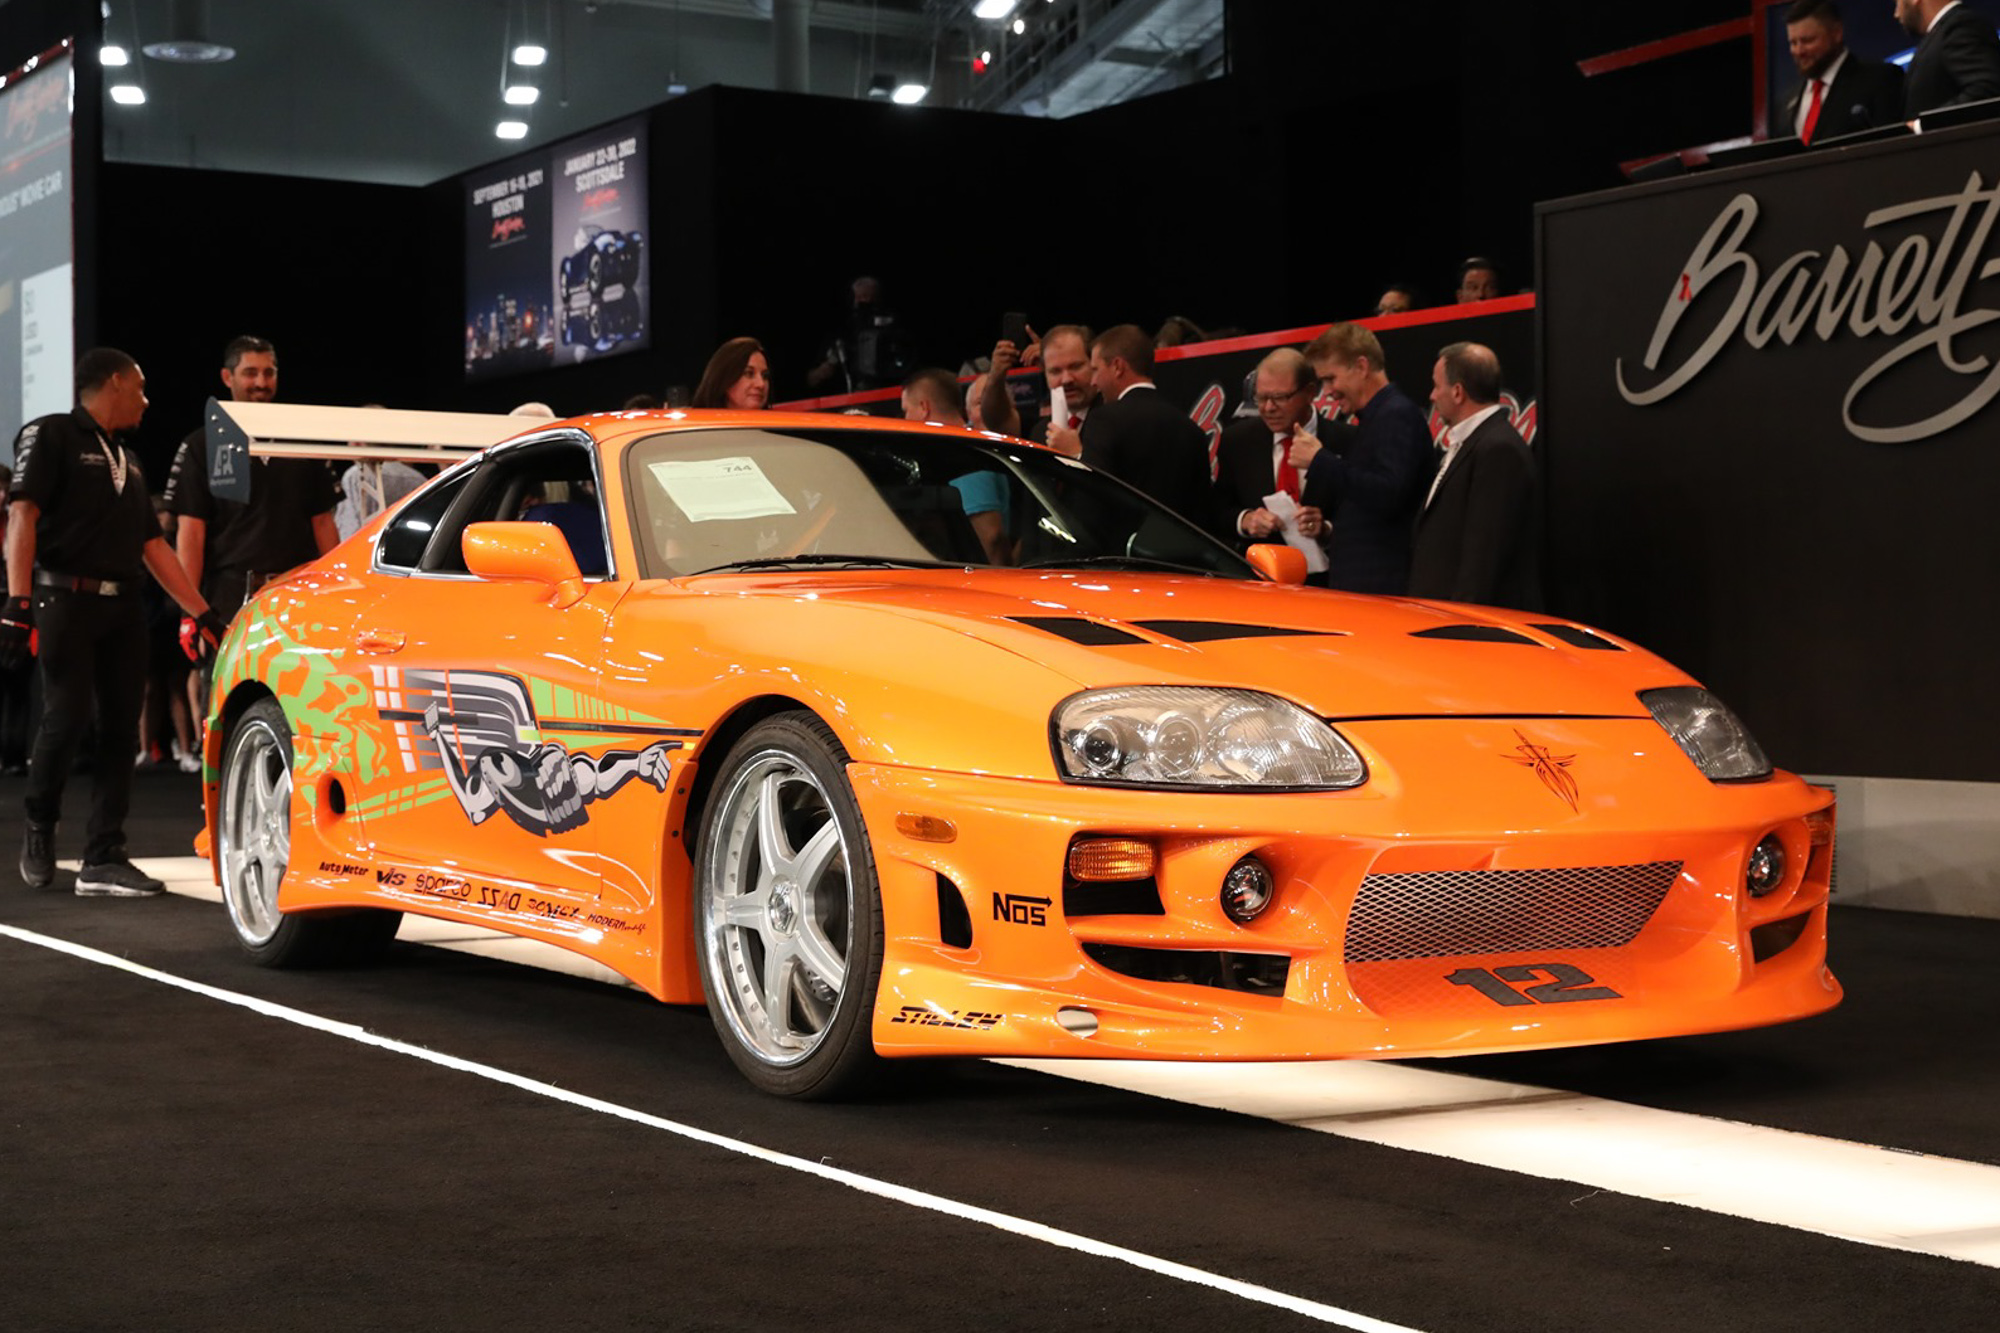 TopGear Toyota Supra Mk4 'Fast & Furious' sold for RM2.2 million!